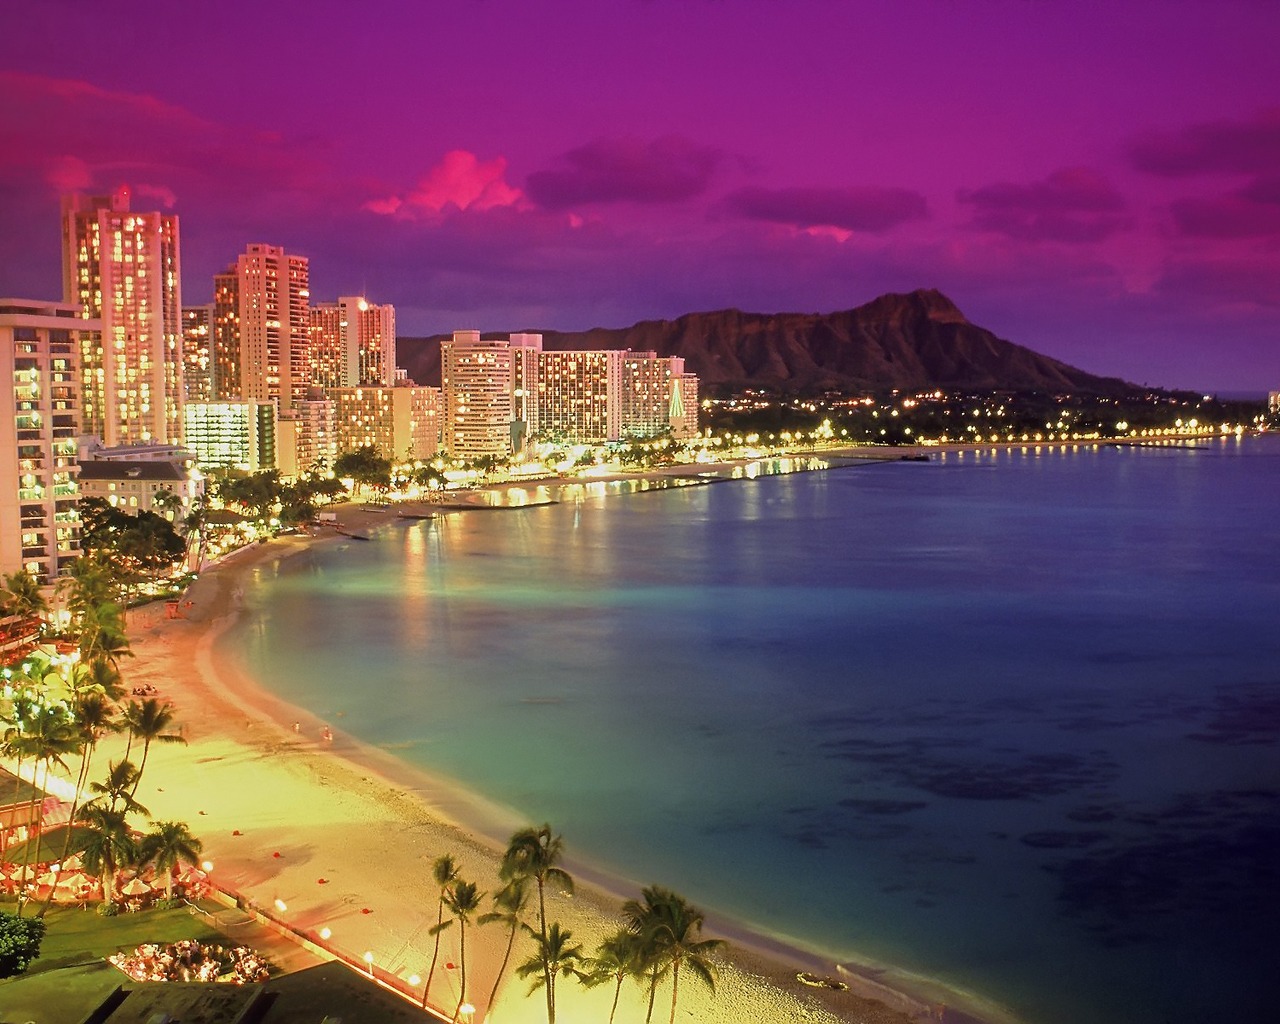 Download this Waikiki Beach Hawaii Travel Guide picture